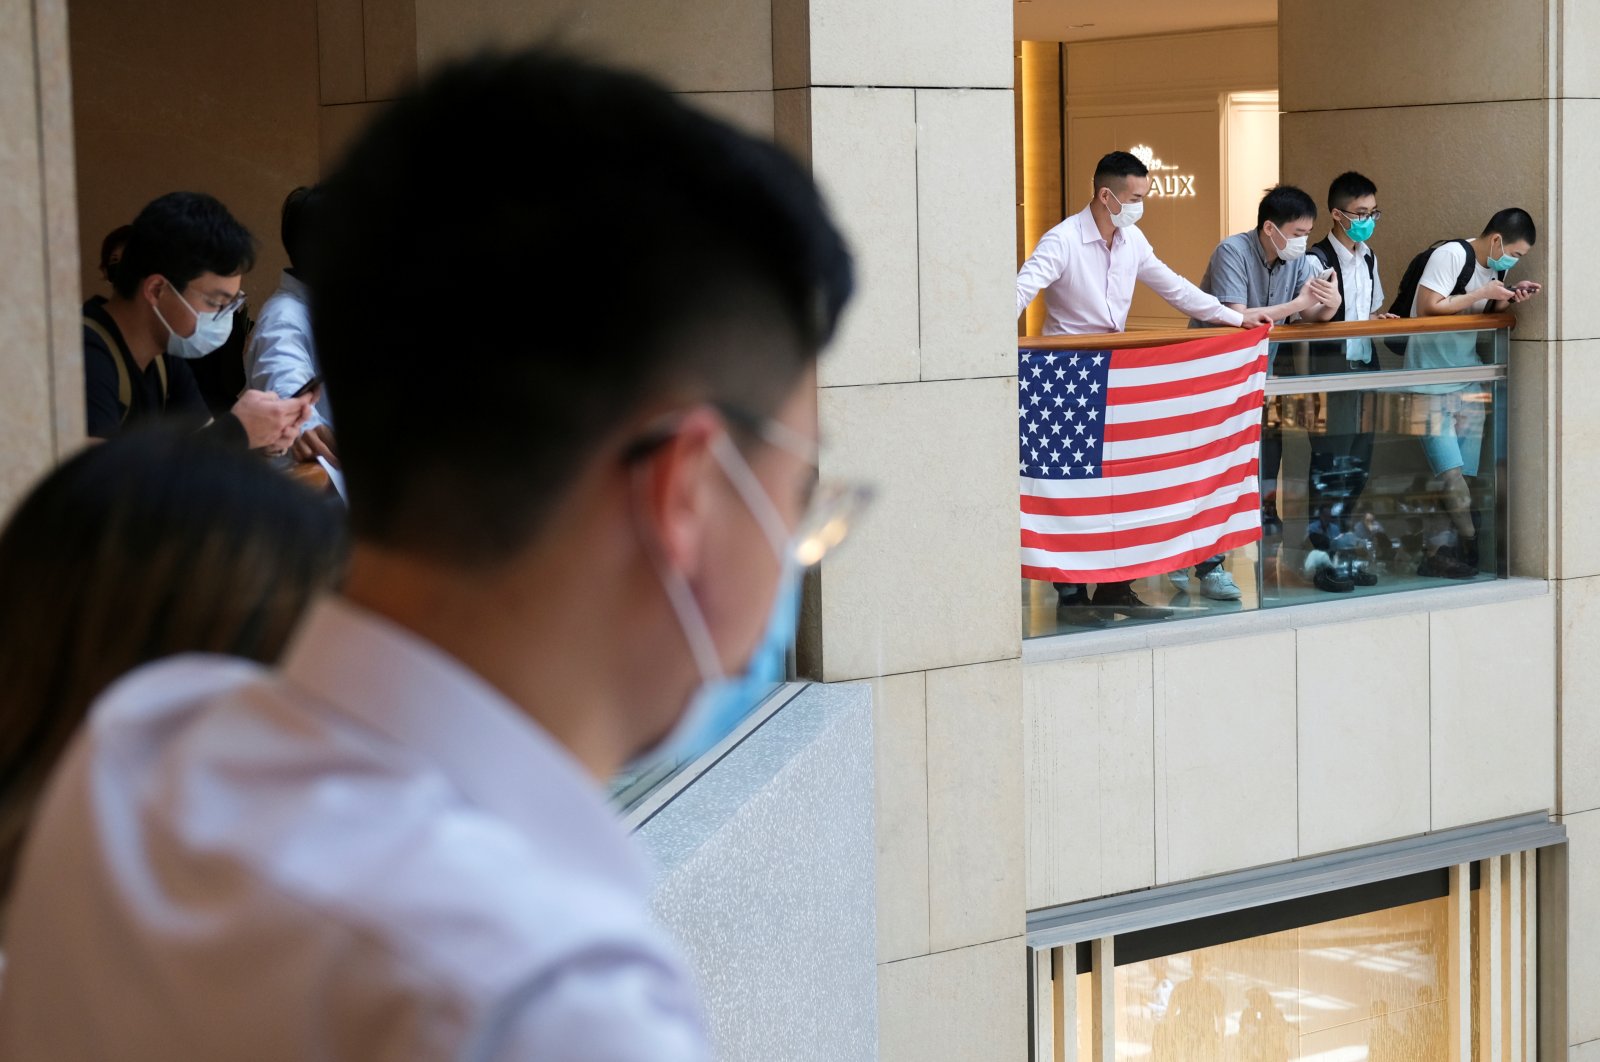 A pro-democracy demonstrator wearing a face mask holds a U.S. flag during a protest against new national security legislation, Hong Kong, June 1, 2020. (Reuters Photo)